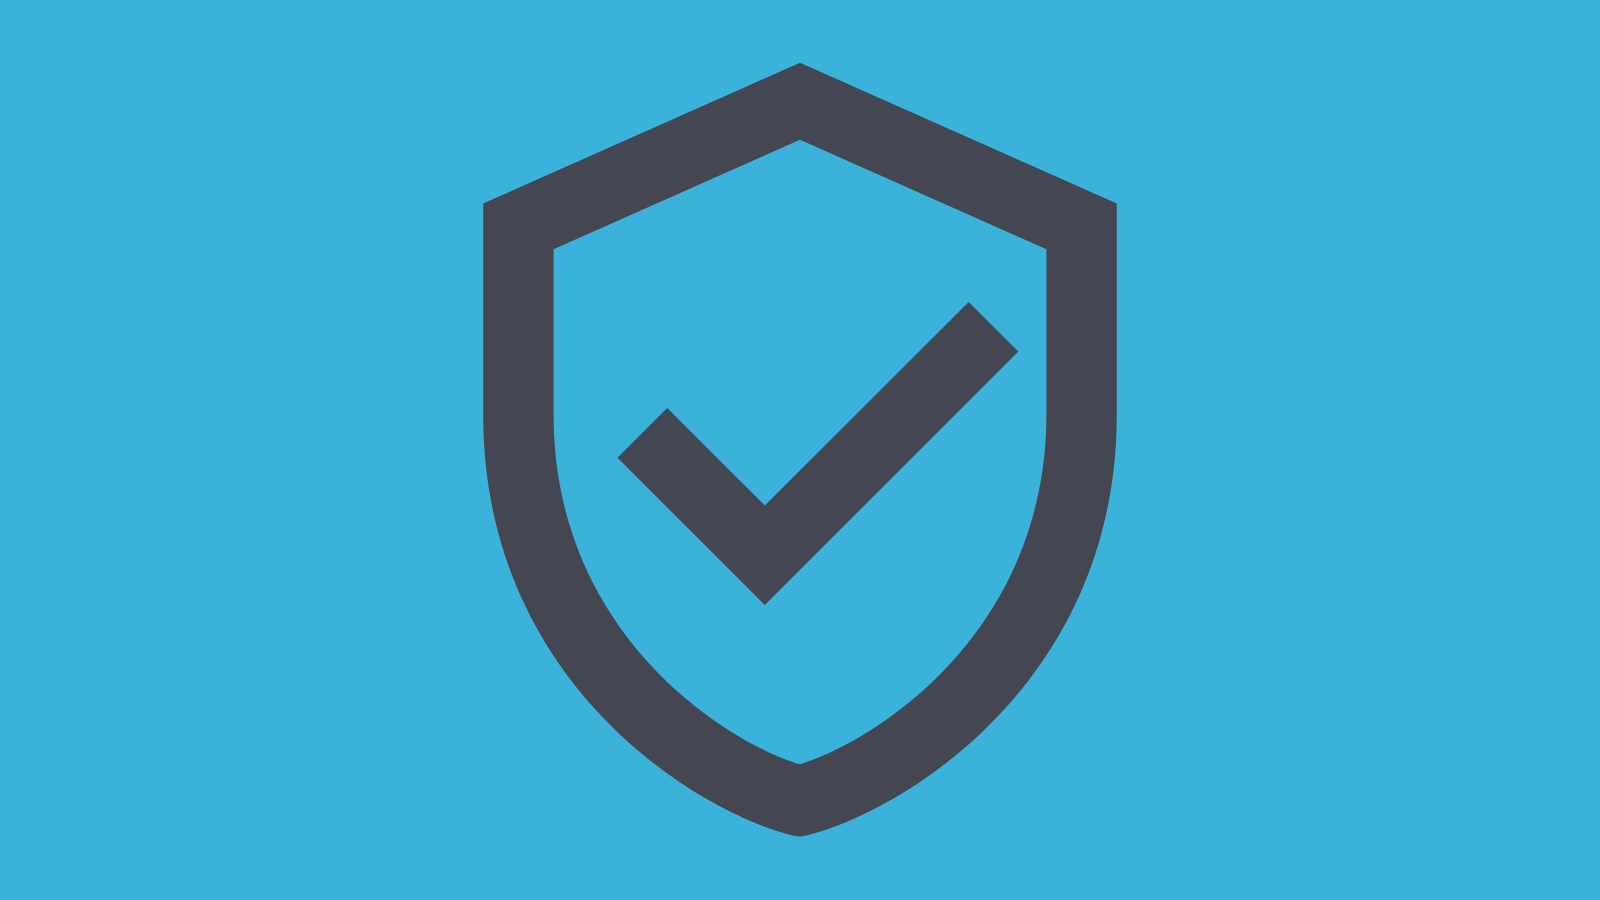 An icon of a shield with a checkmark in it to represent protection and verification